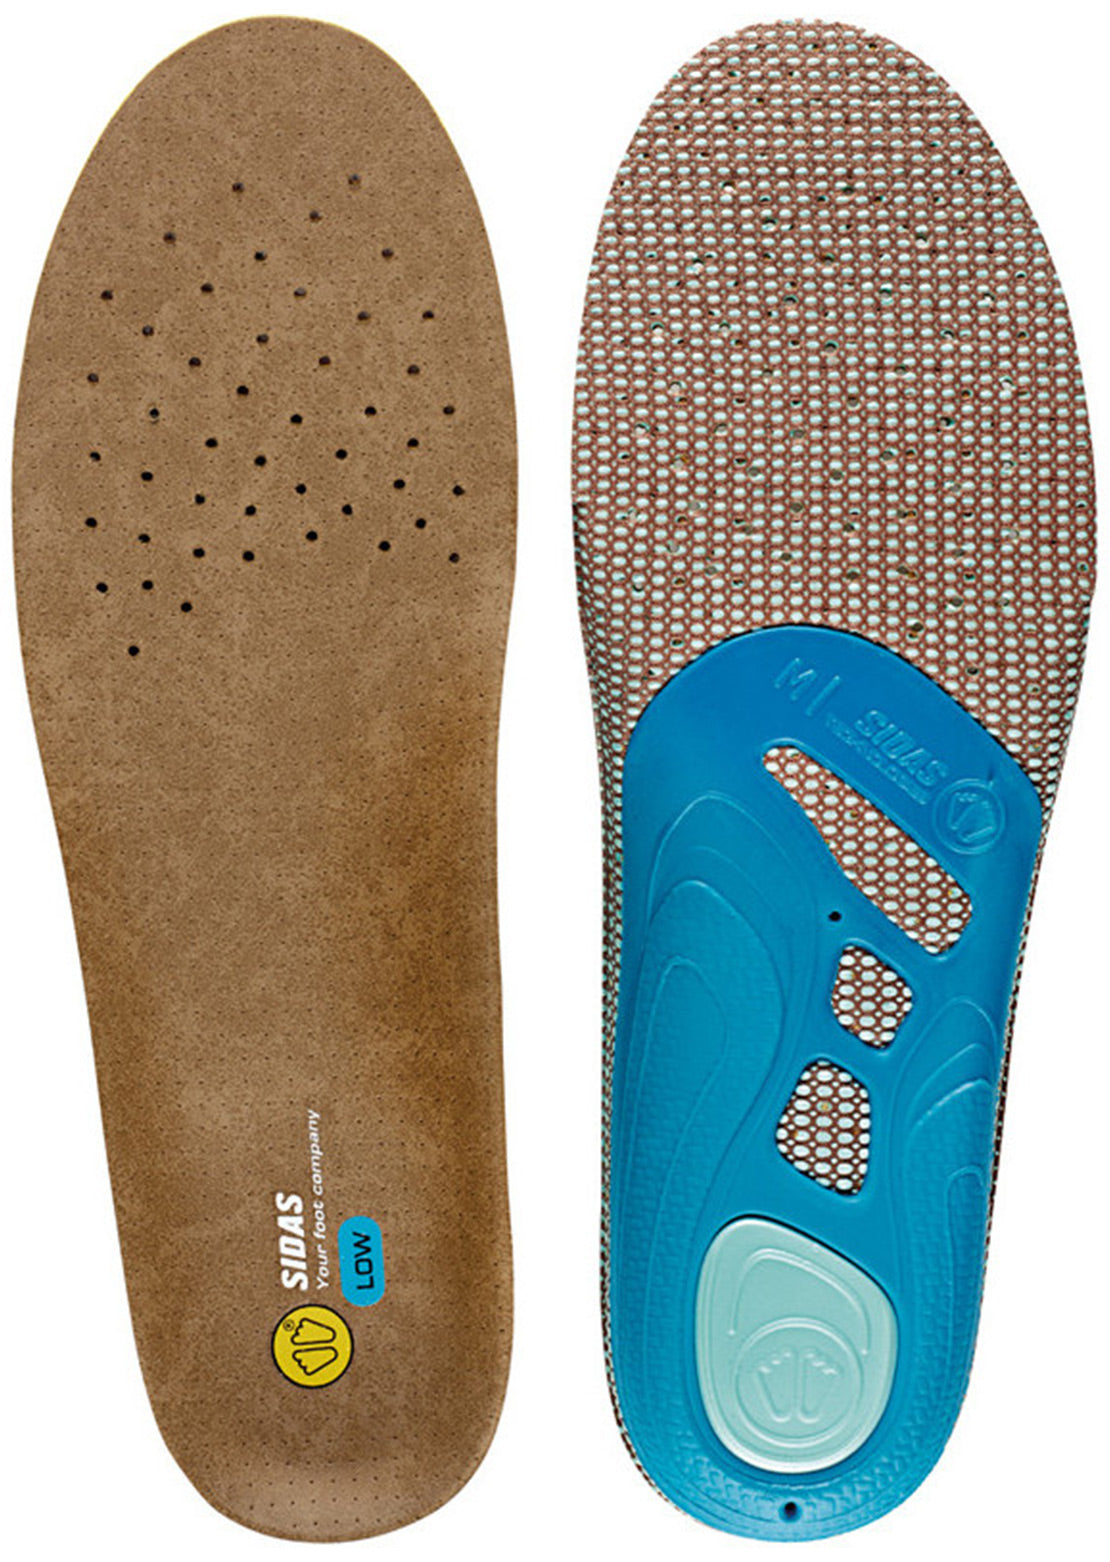 Sidas 3Feet Outdoor Low Insoles Blue